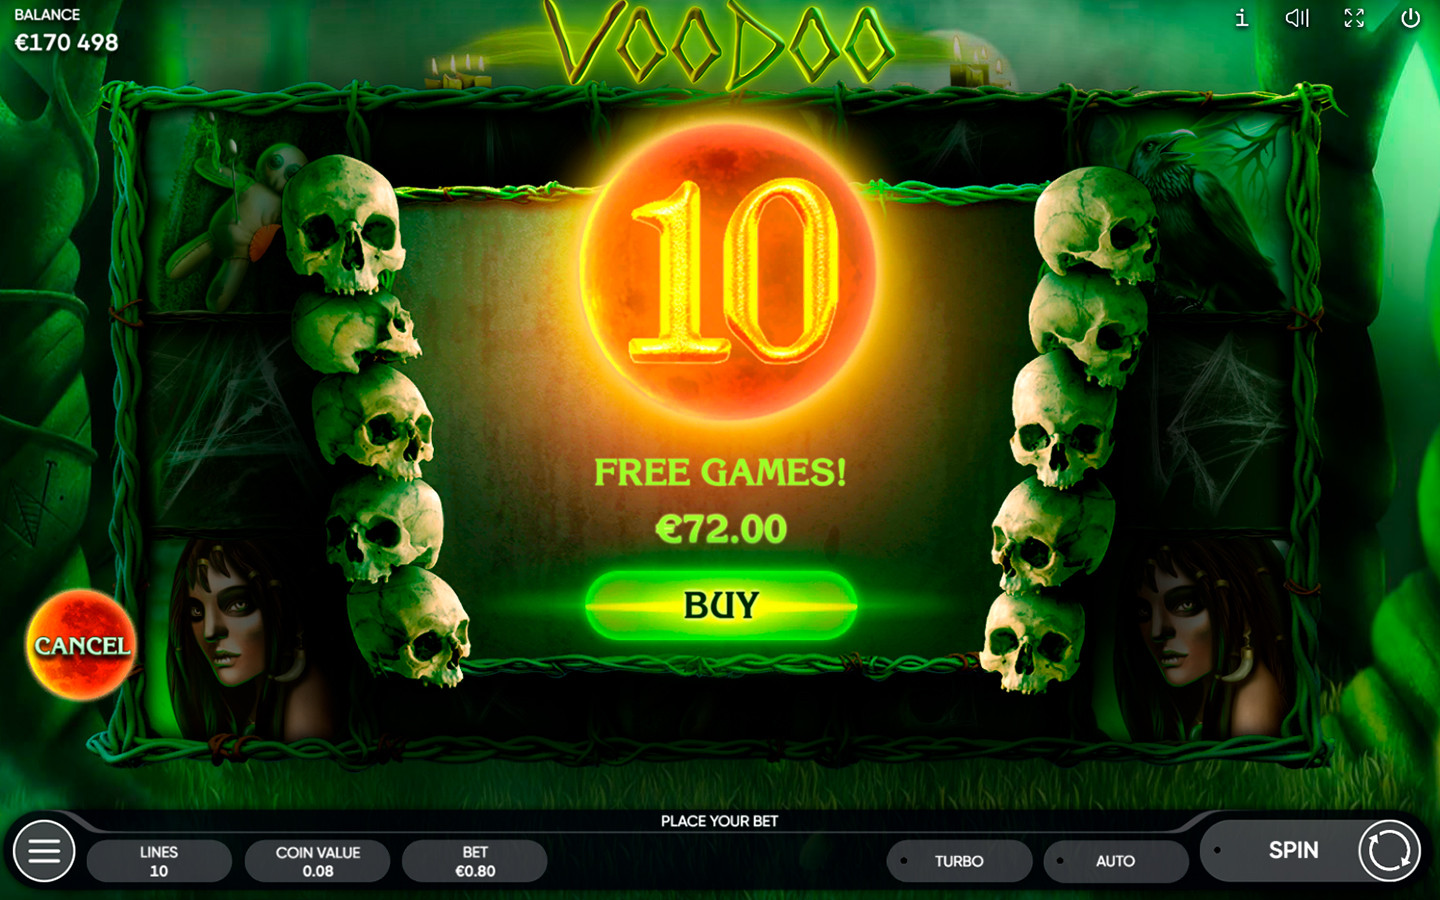 TOP HORROR SLOTS OF 2021 | Try VOODOO GAME by Endorphina